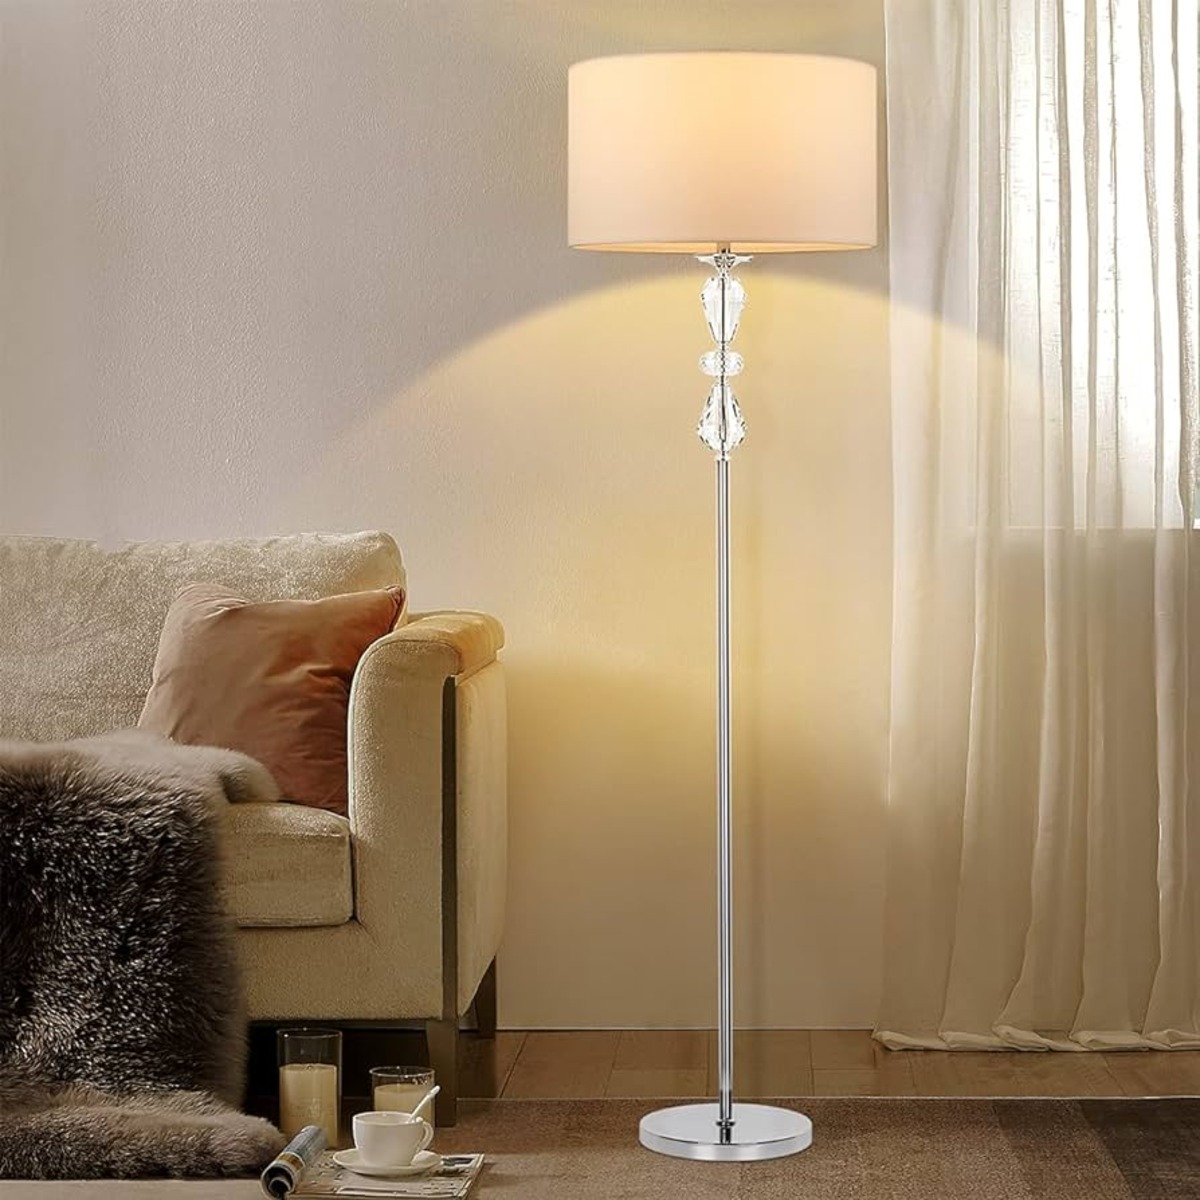 How To Take Apart A Floor Lamp